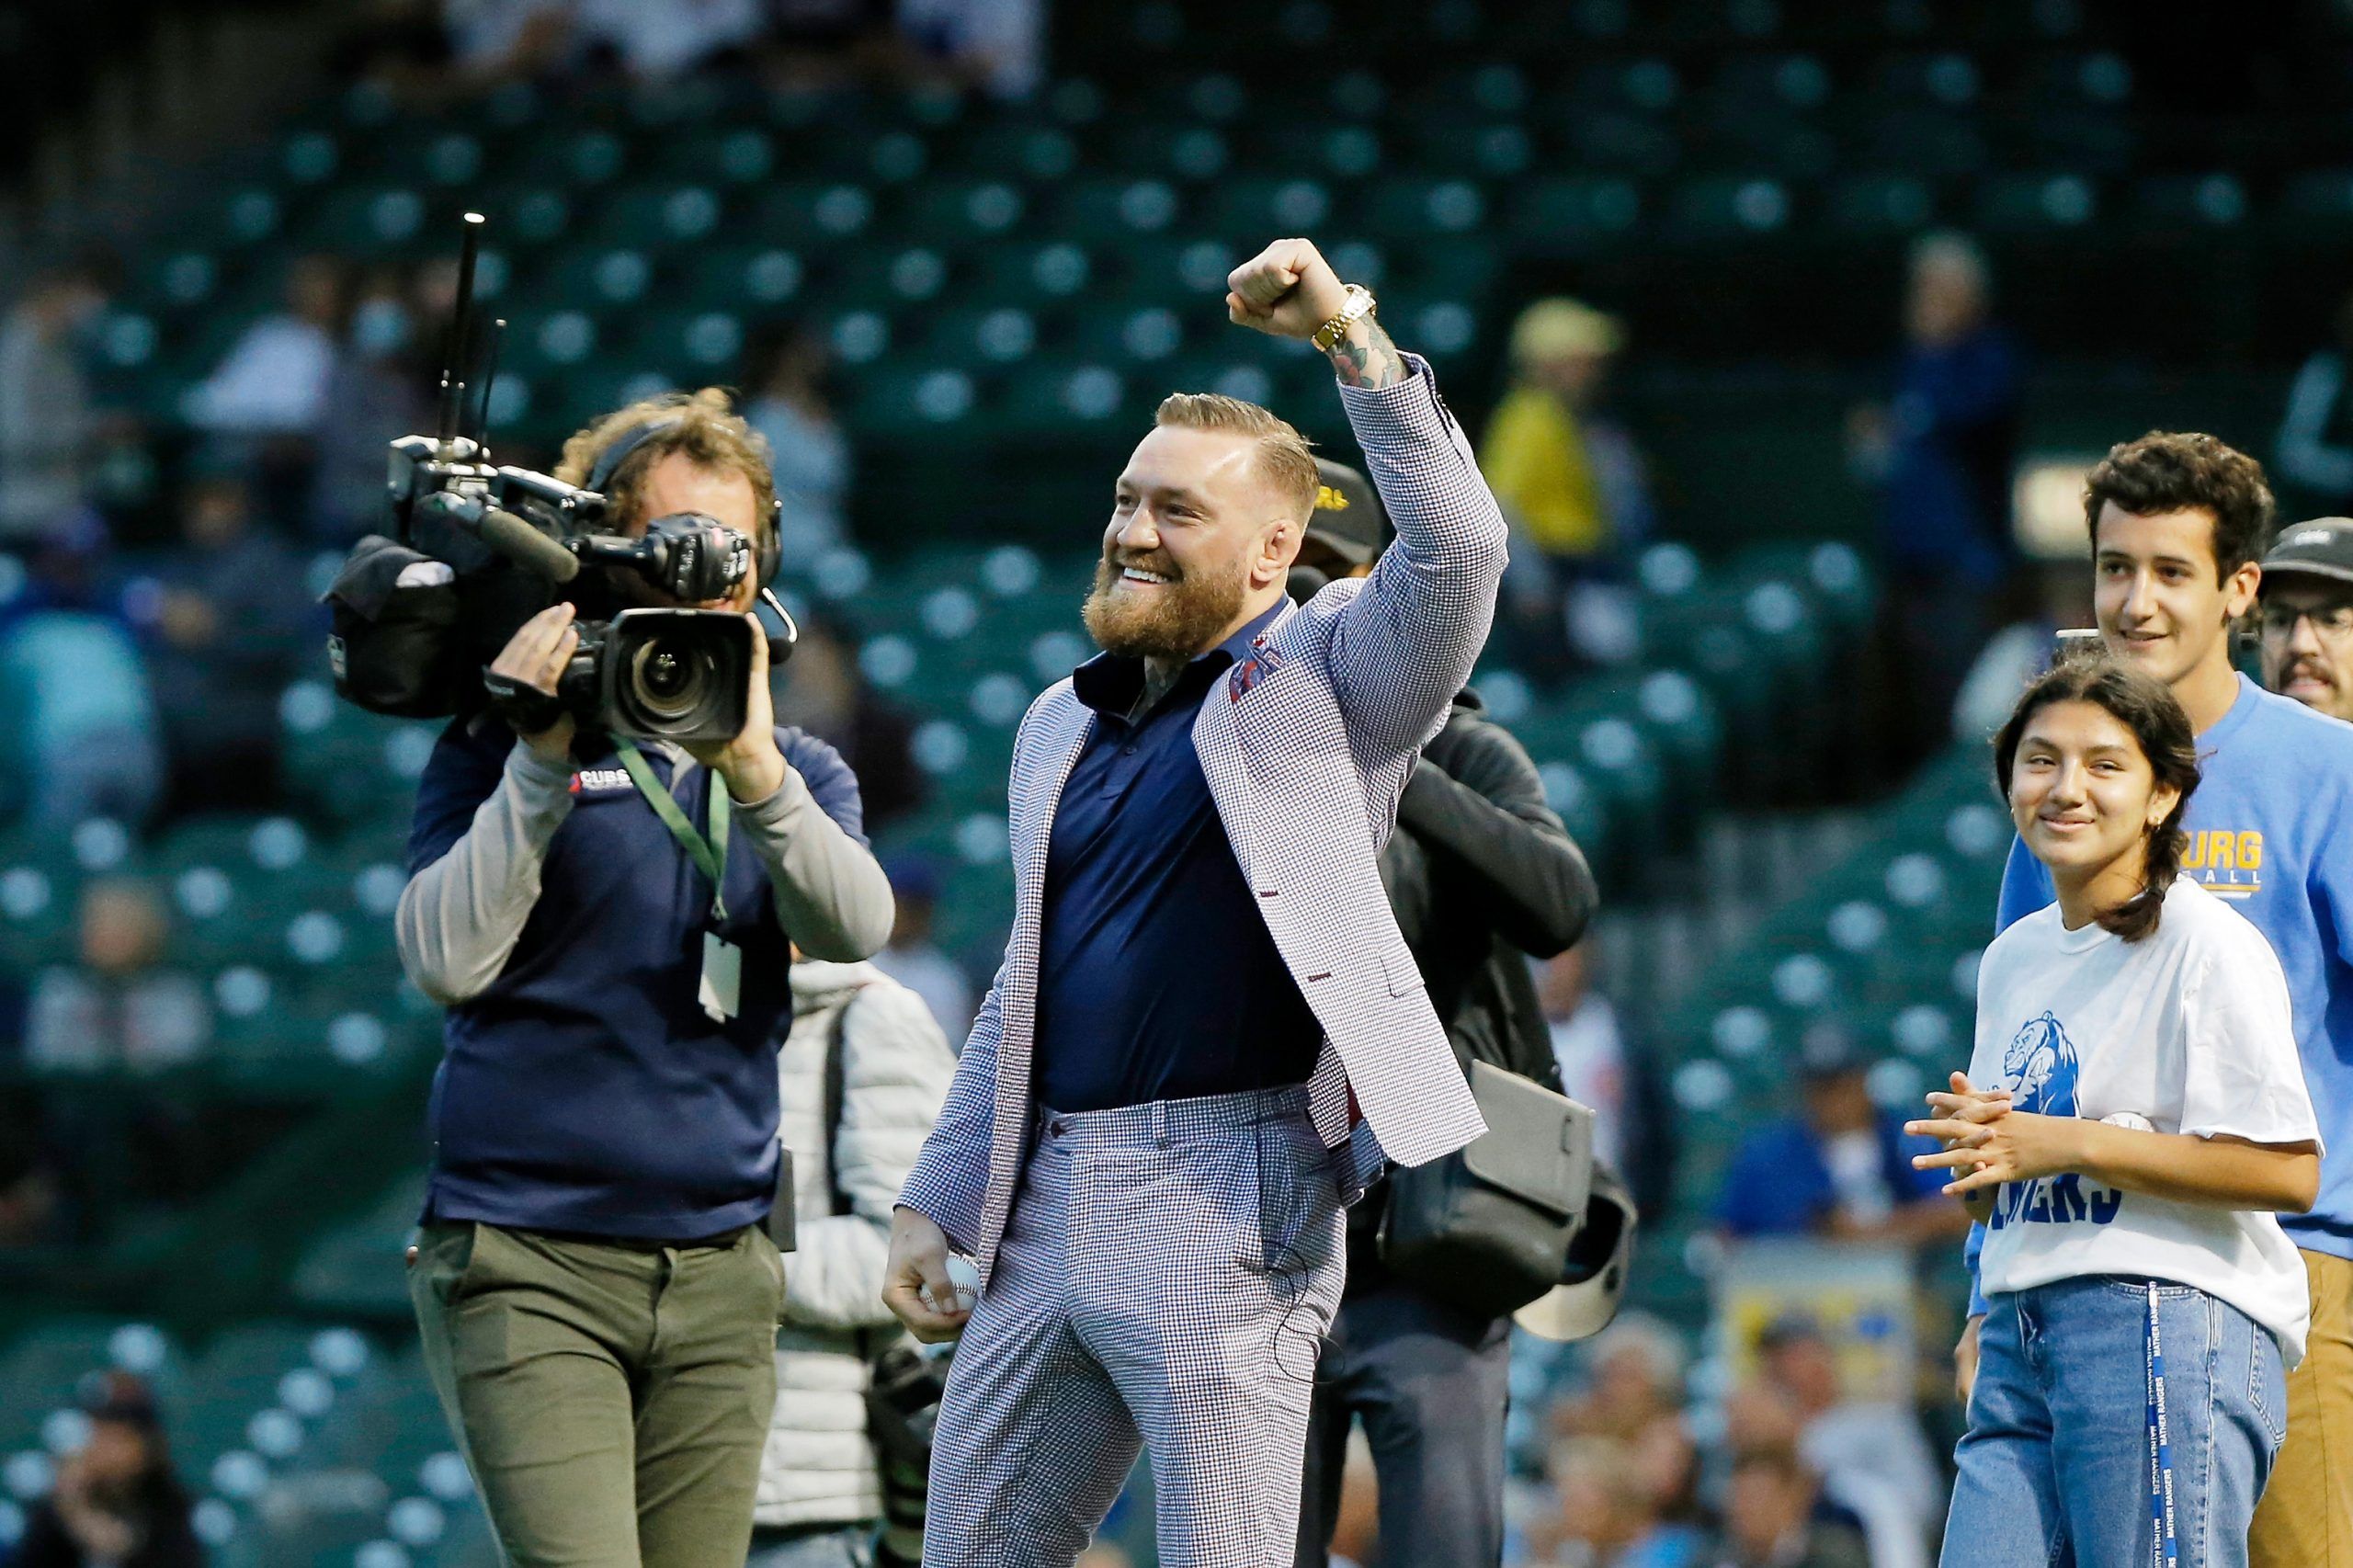 Sep 21, 2021; Chicago, Illinois, USA; MMA fighter Conor McGregor pumps his fist as he walks on the field before the game between the Chicago Cubs and the Minnesota Twins at Wrigley Field. Mandatory Credit: Jon Durr-USA TODAY Sports